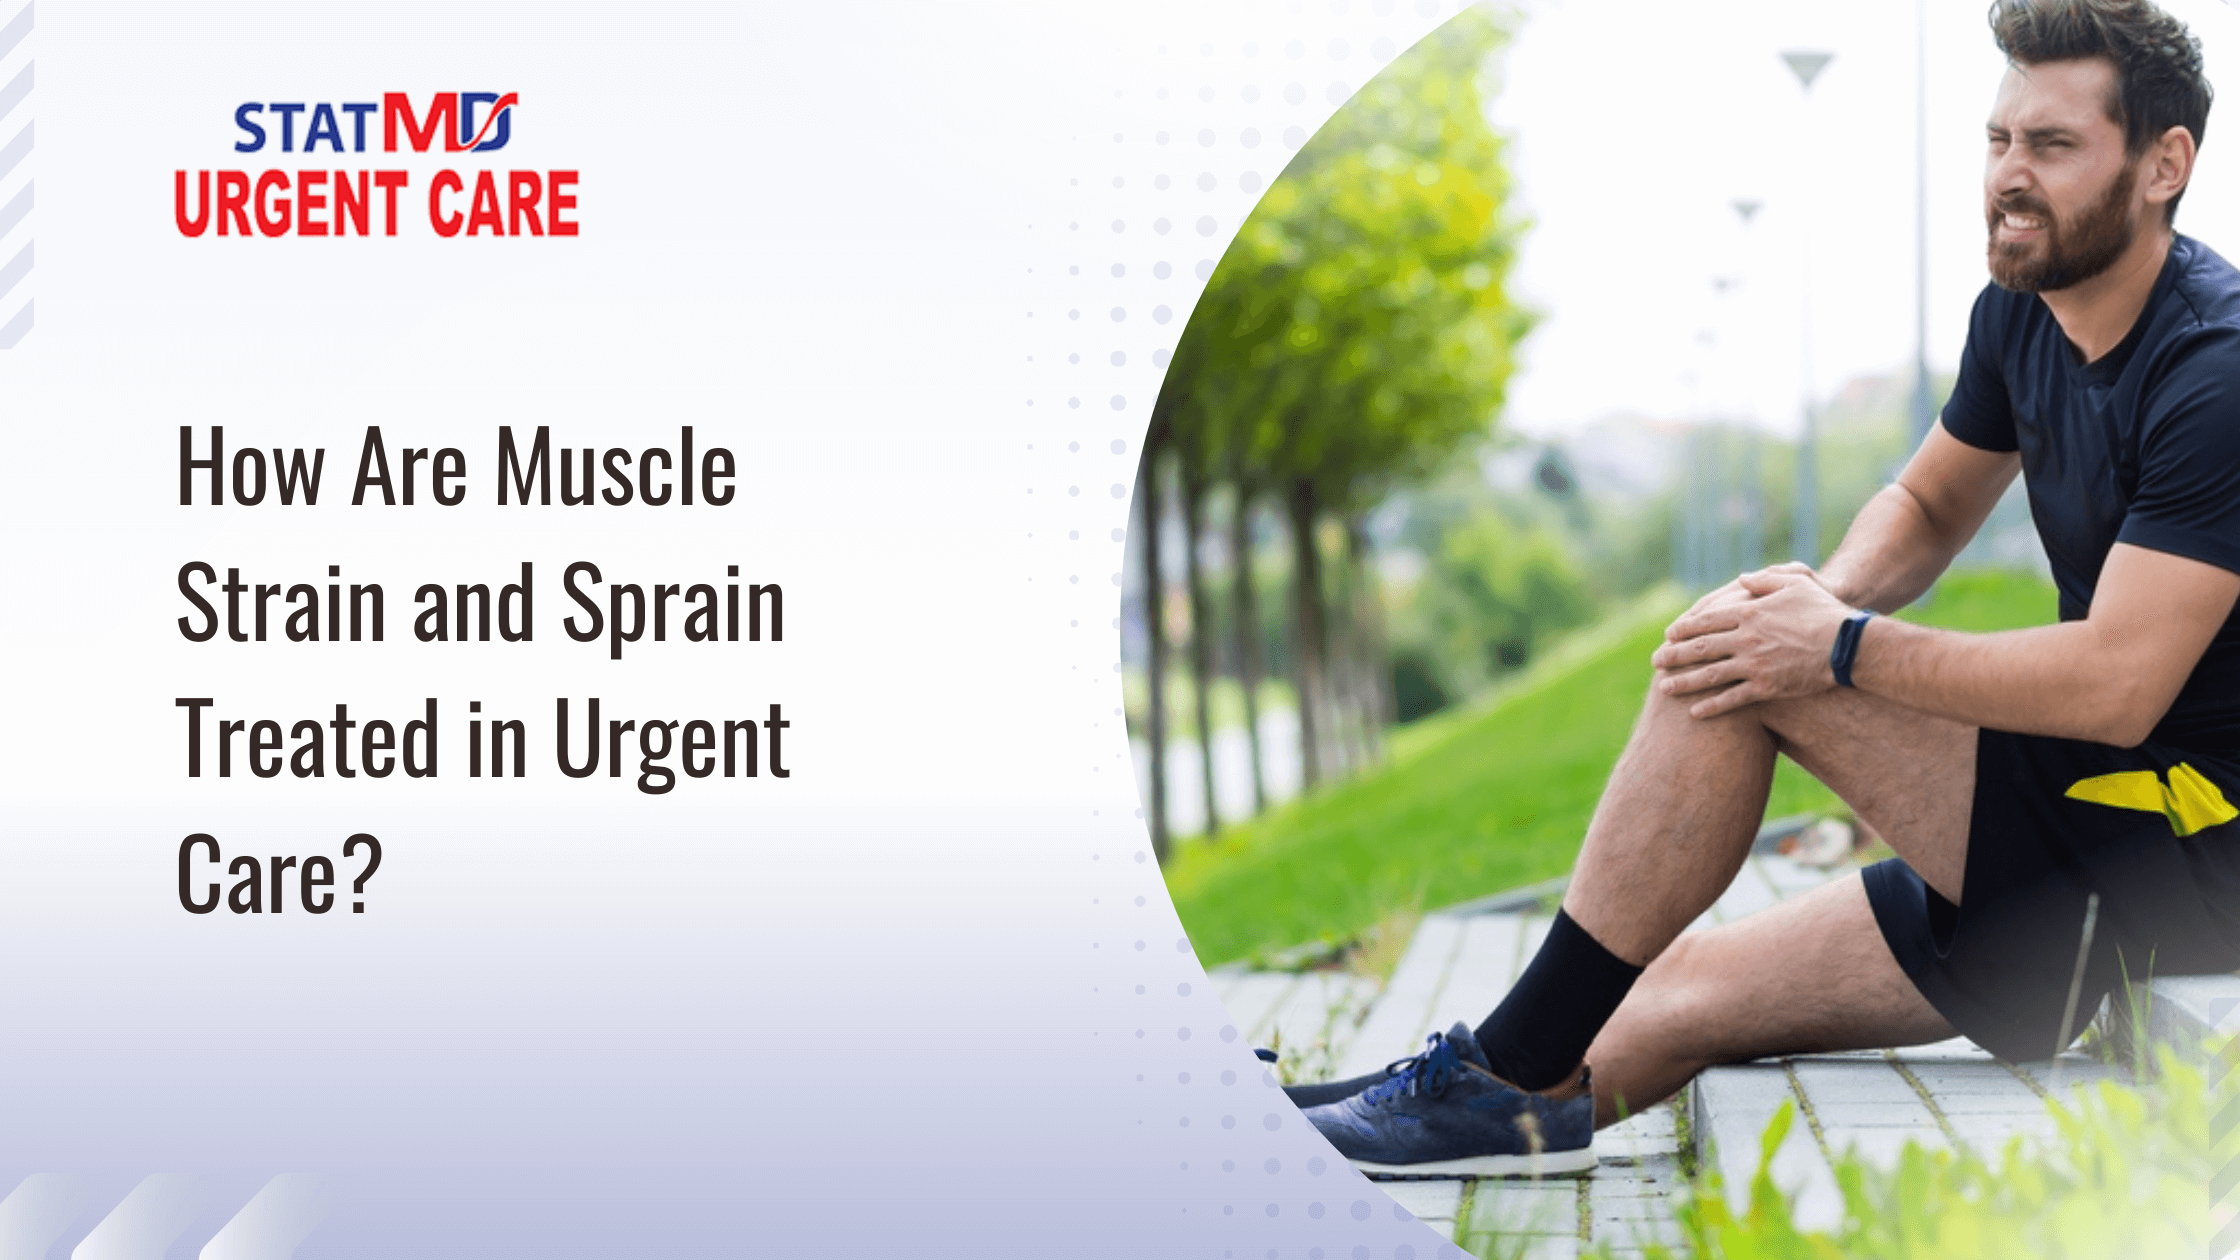 How Are Muscle Strain and Sprain Treated in Urgent Care?